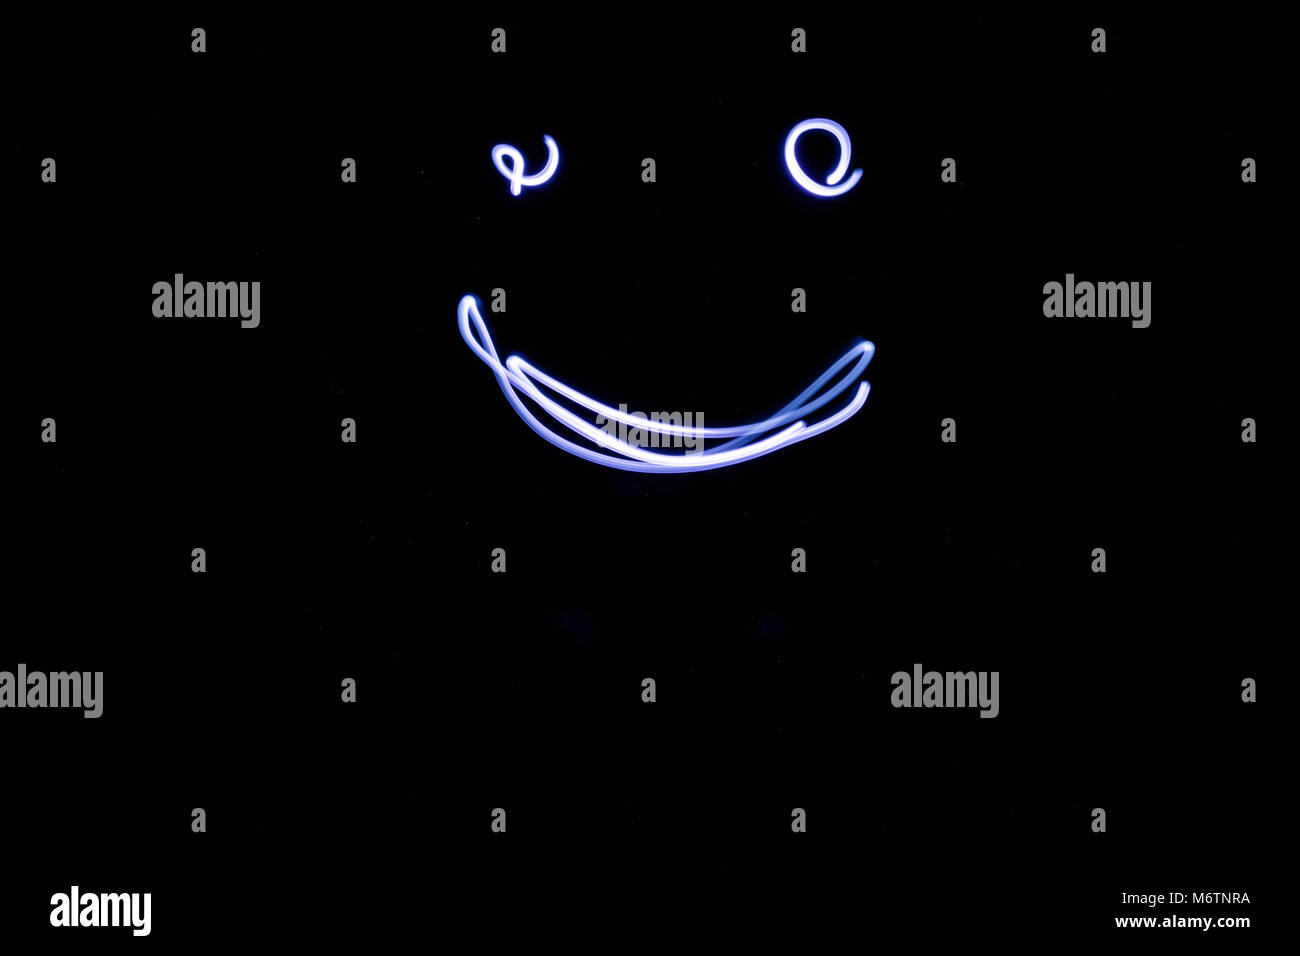 neon smiley face bright colors gradient blue and white Stock Photo